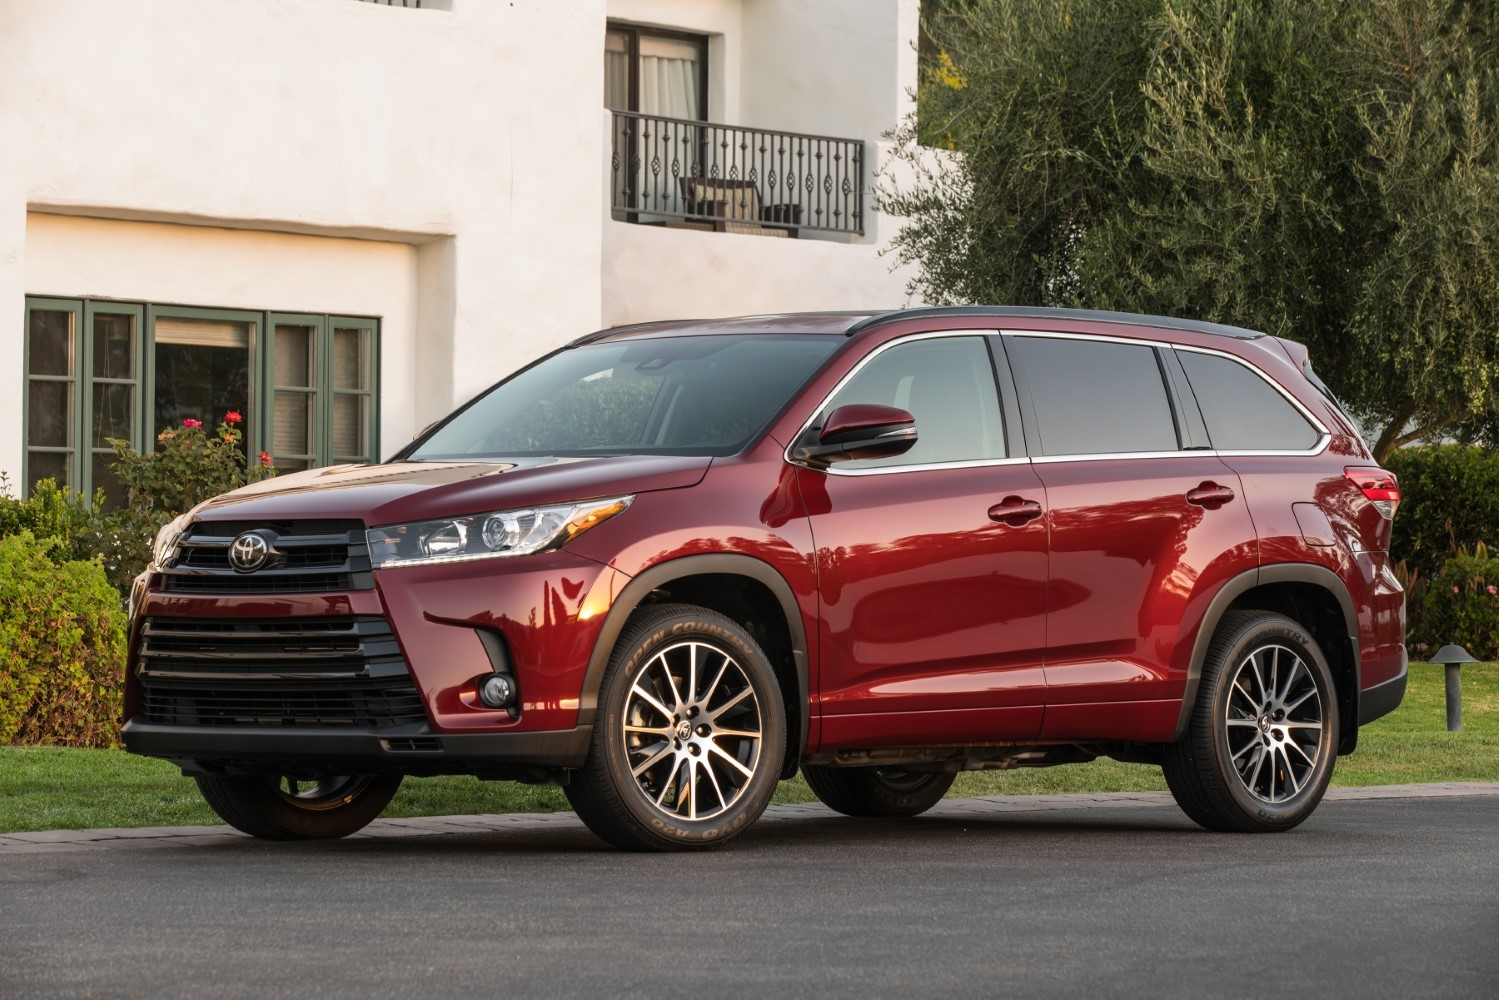 2018 Toyota Highlander SUV Specs, Review, and Pricing  CarSession